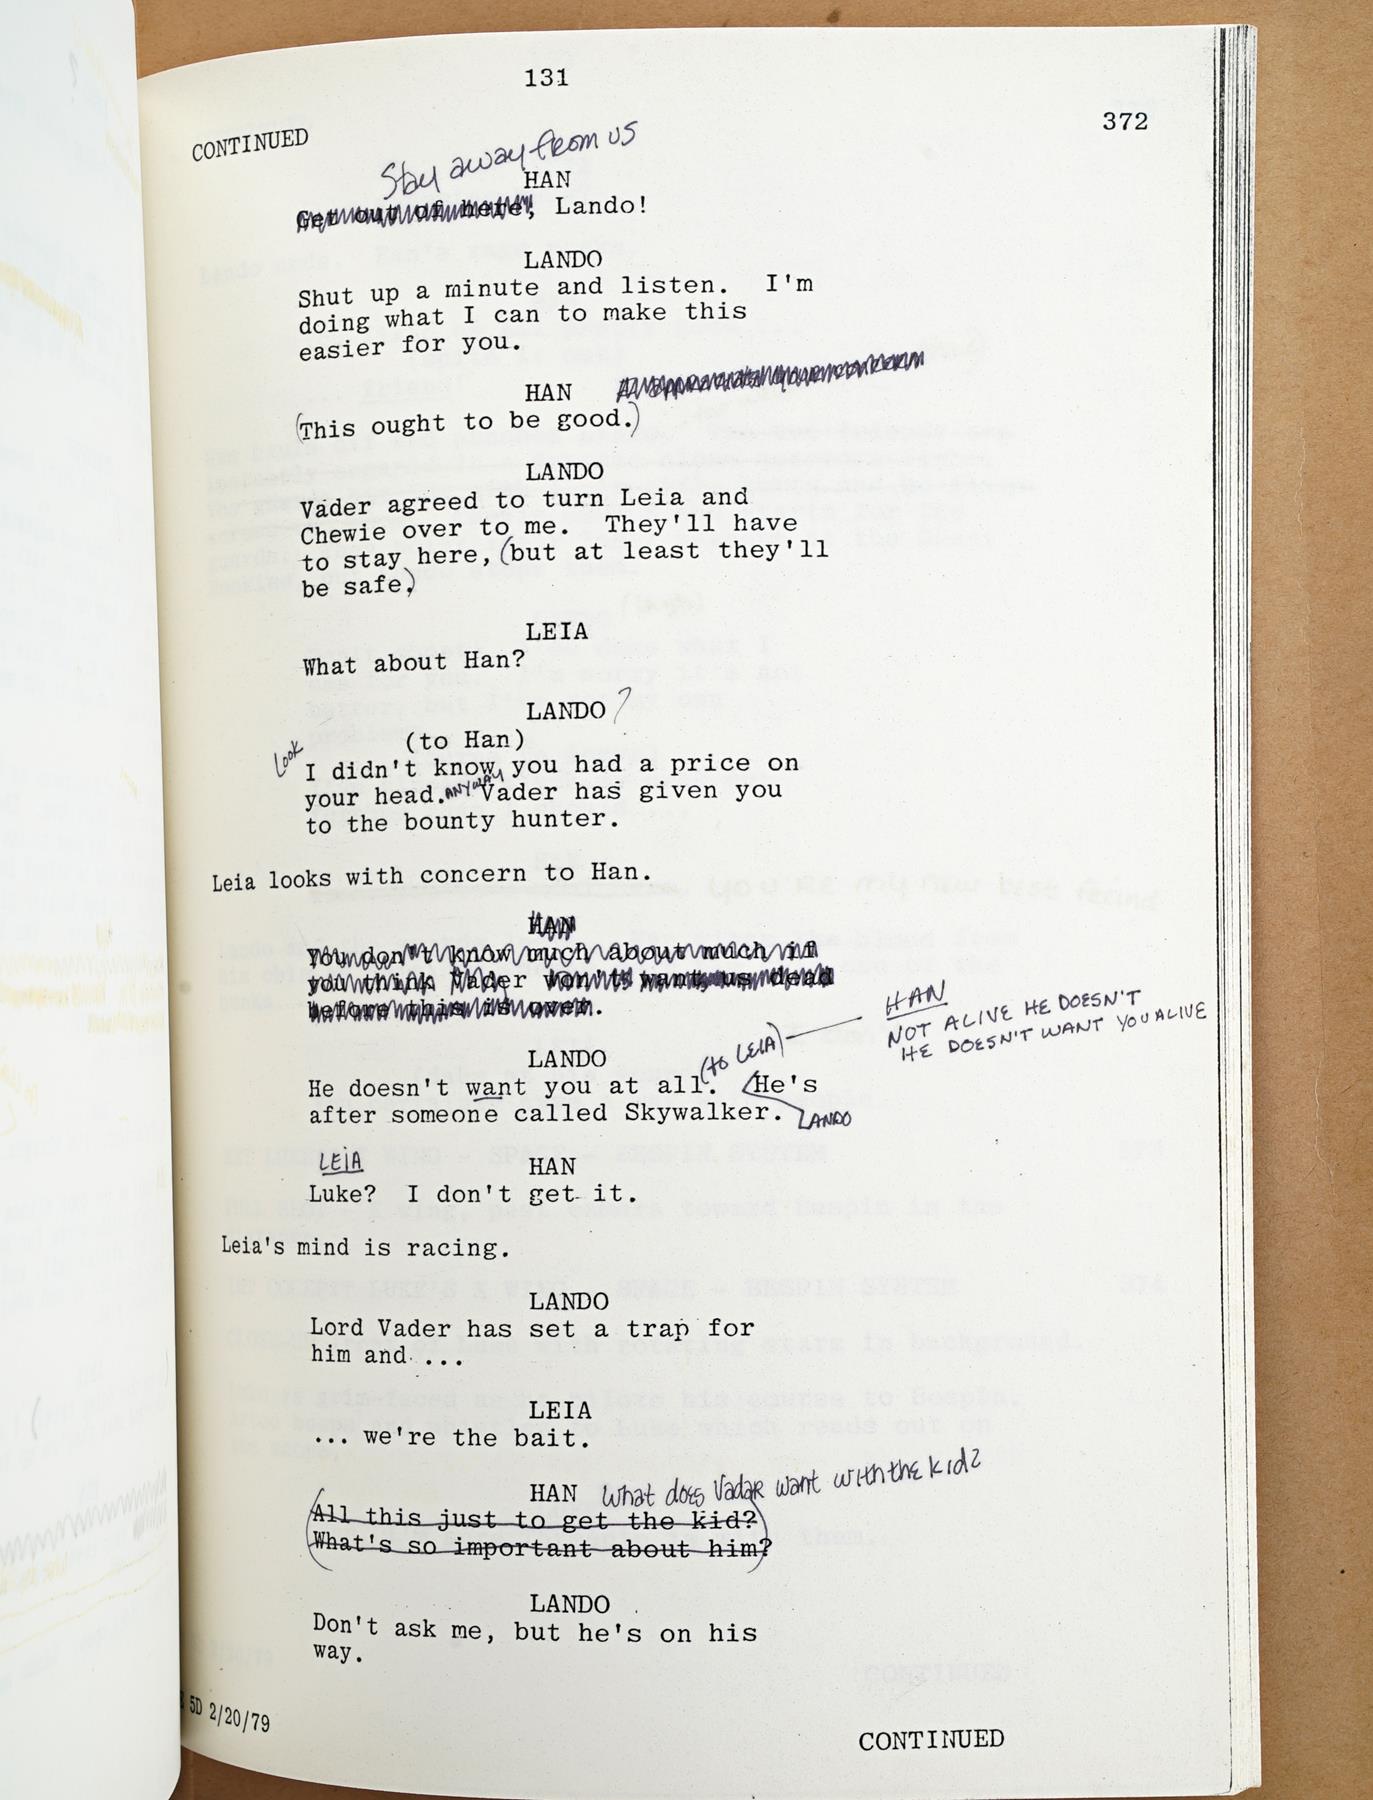 Carrie Fisher's script from Star Wars, Prop Store auction